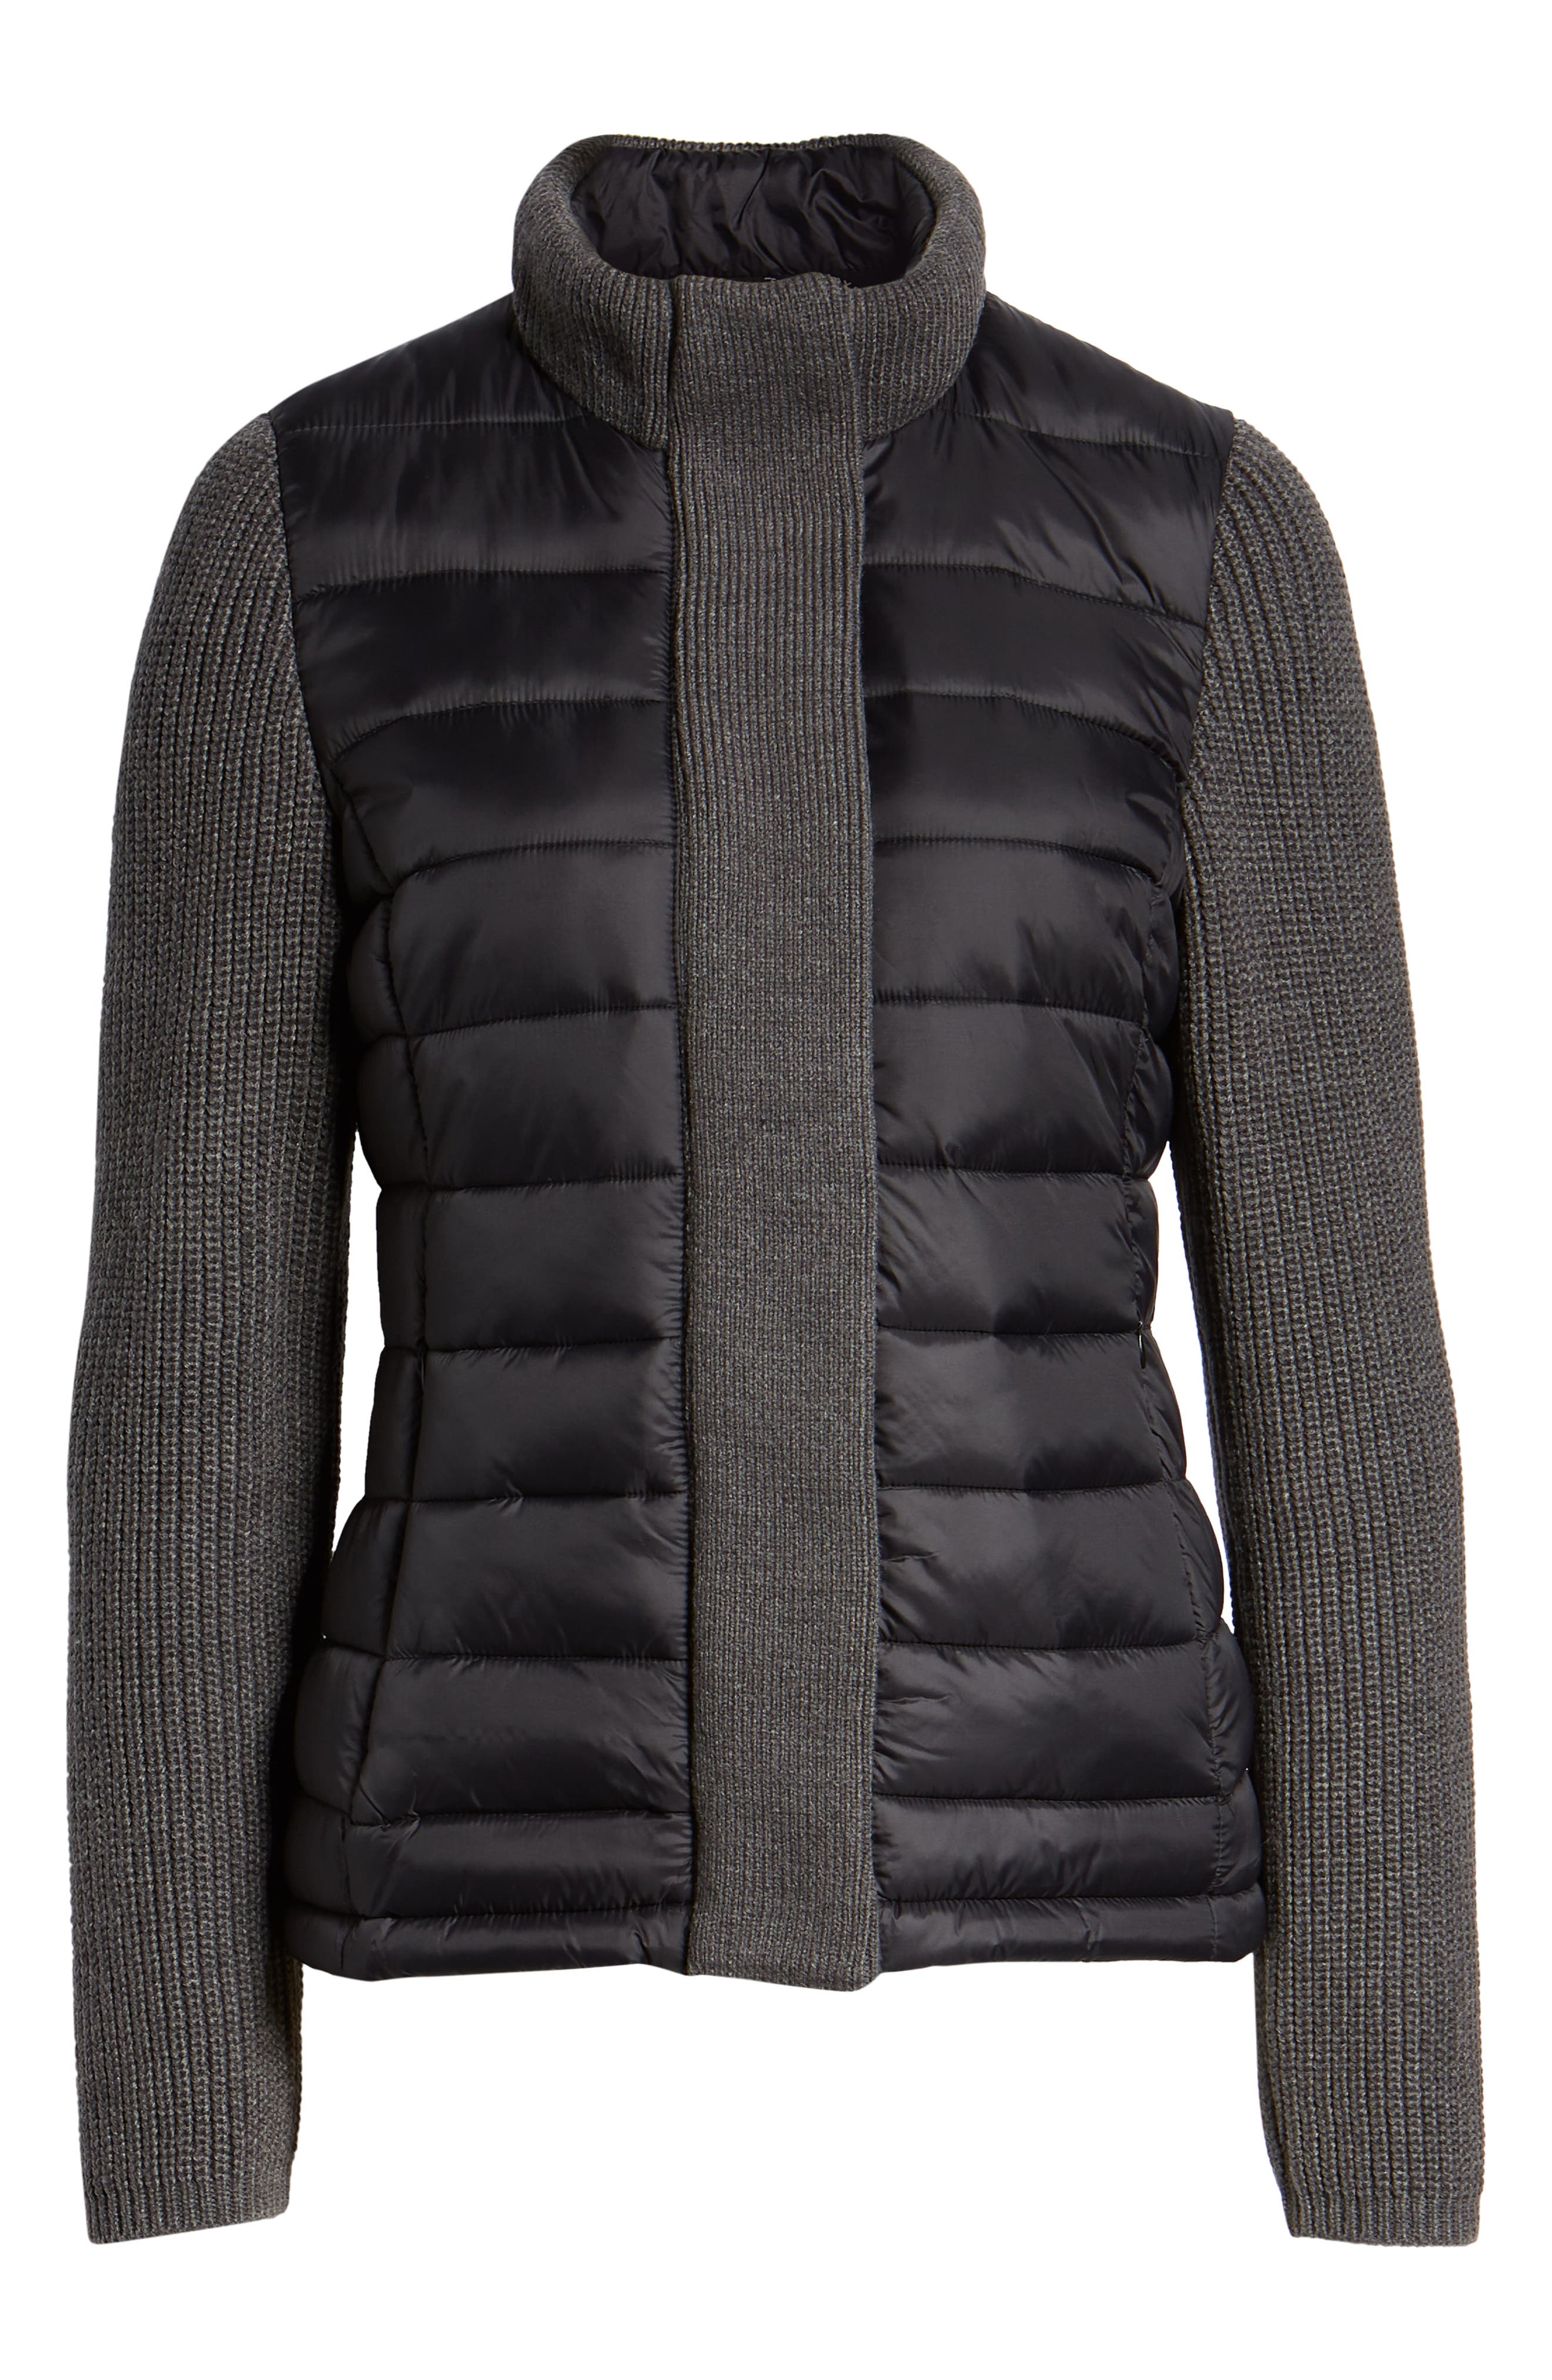 Andrew Marc | Mark New York Packable Knit Trim Puffer Jacket ...